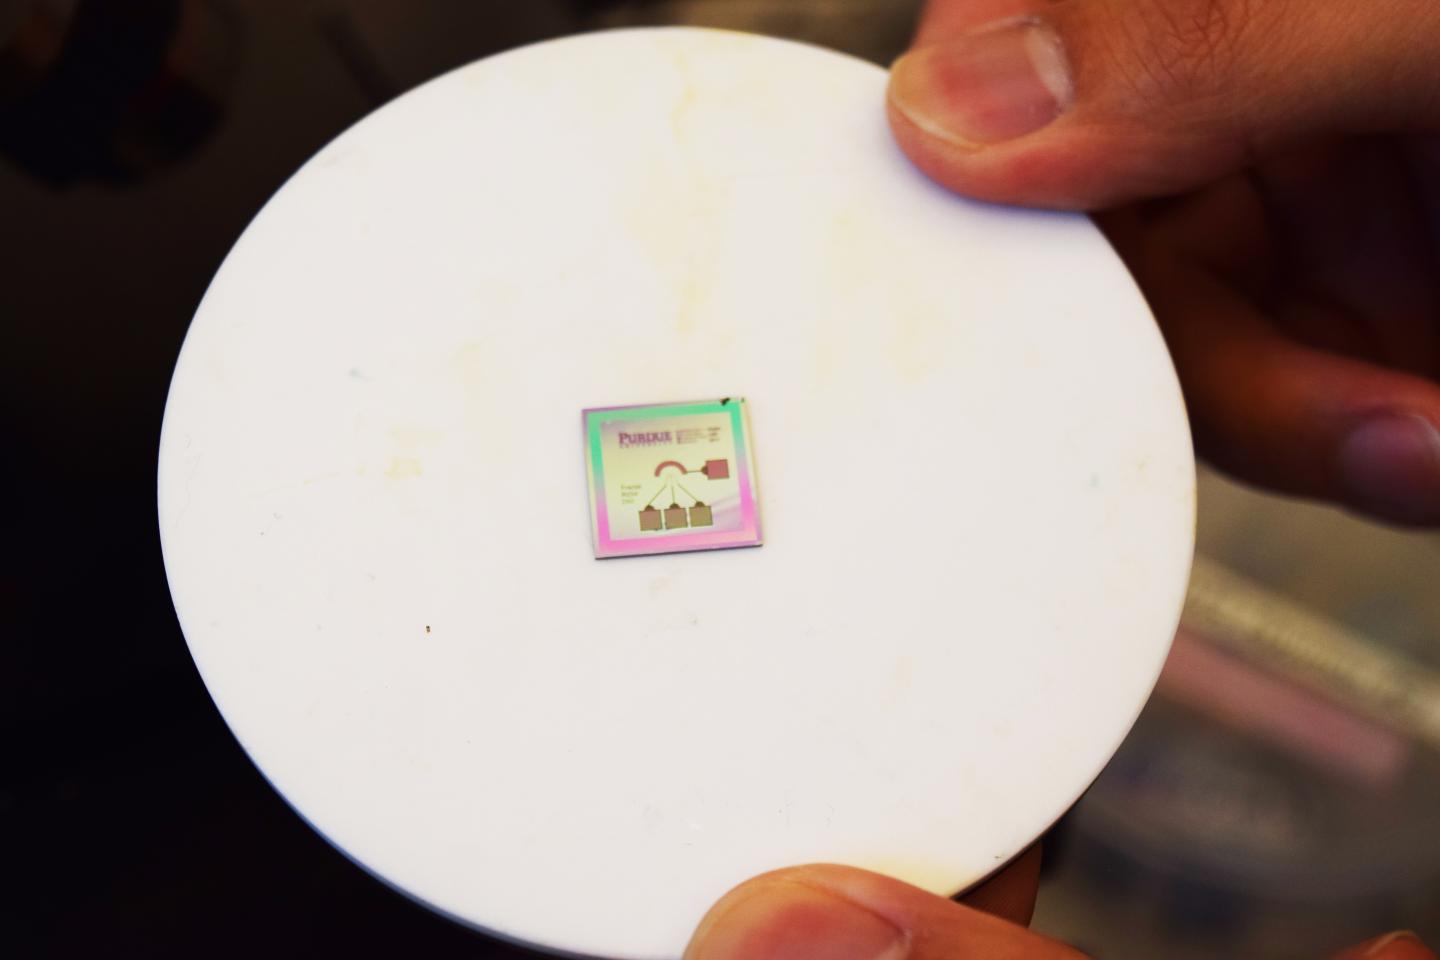 Electrode on a Chip